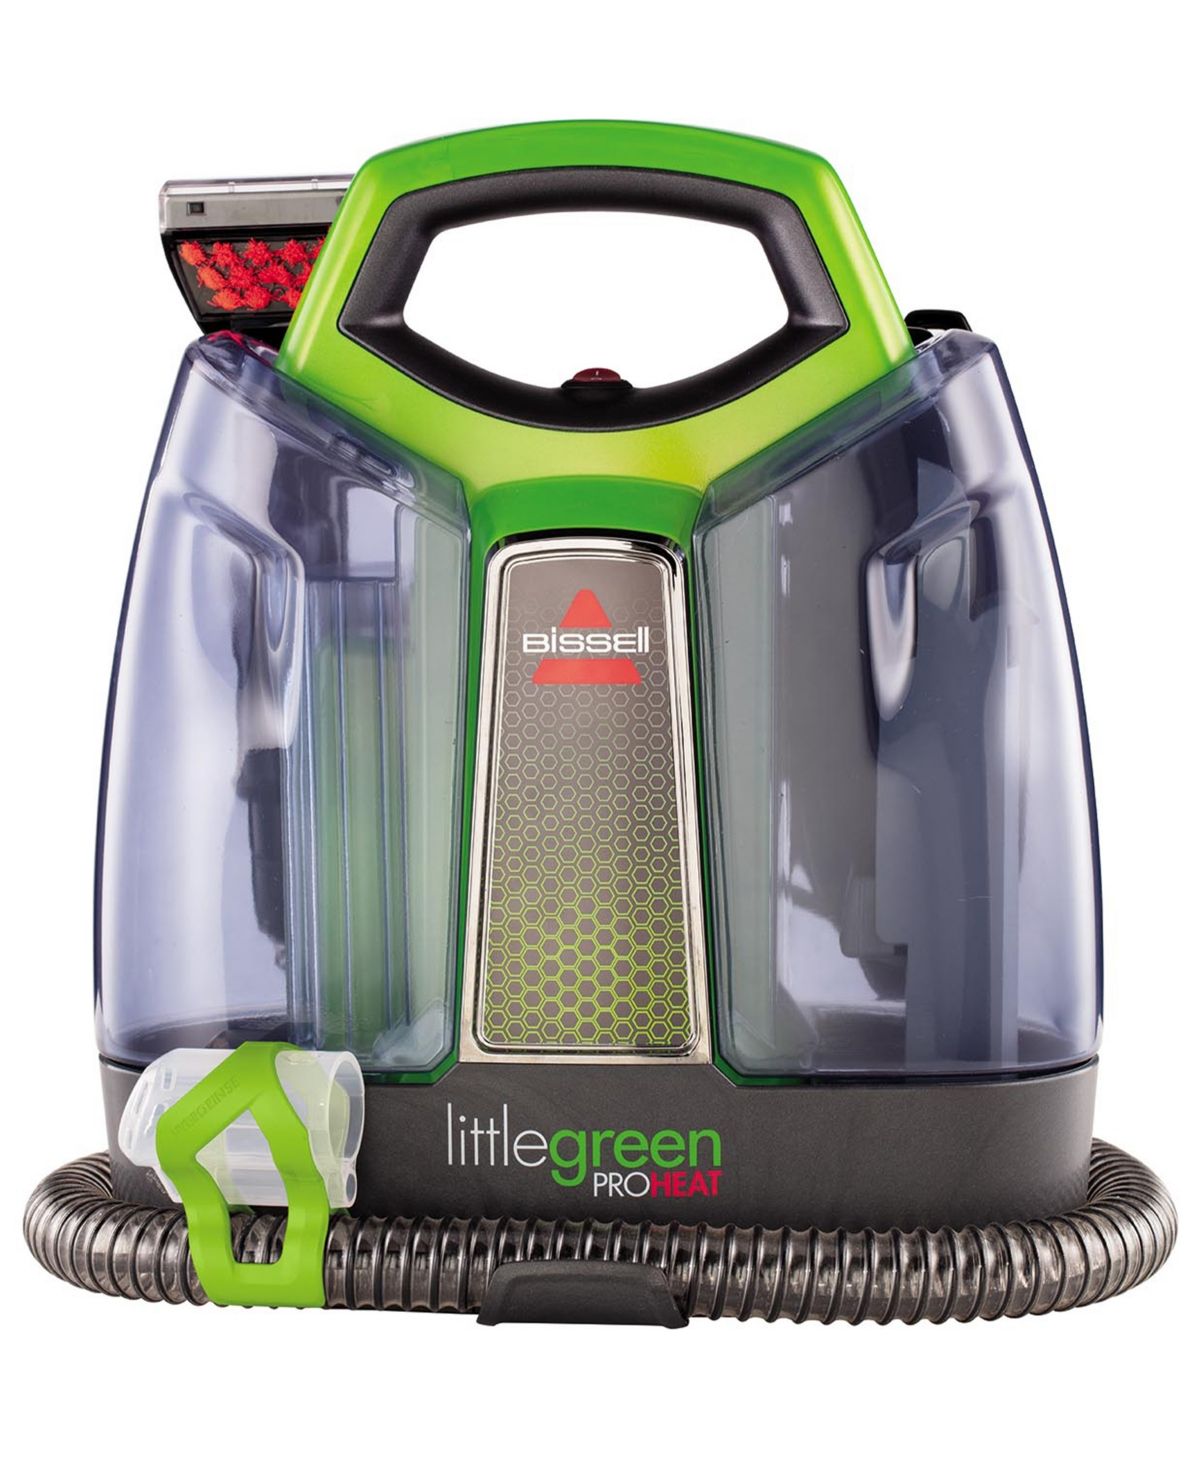 Bissell Little Green Proheat Portable Carpet Cleaner | Macys (US)